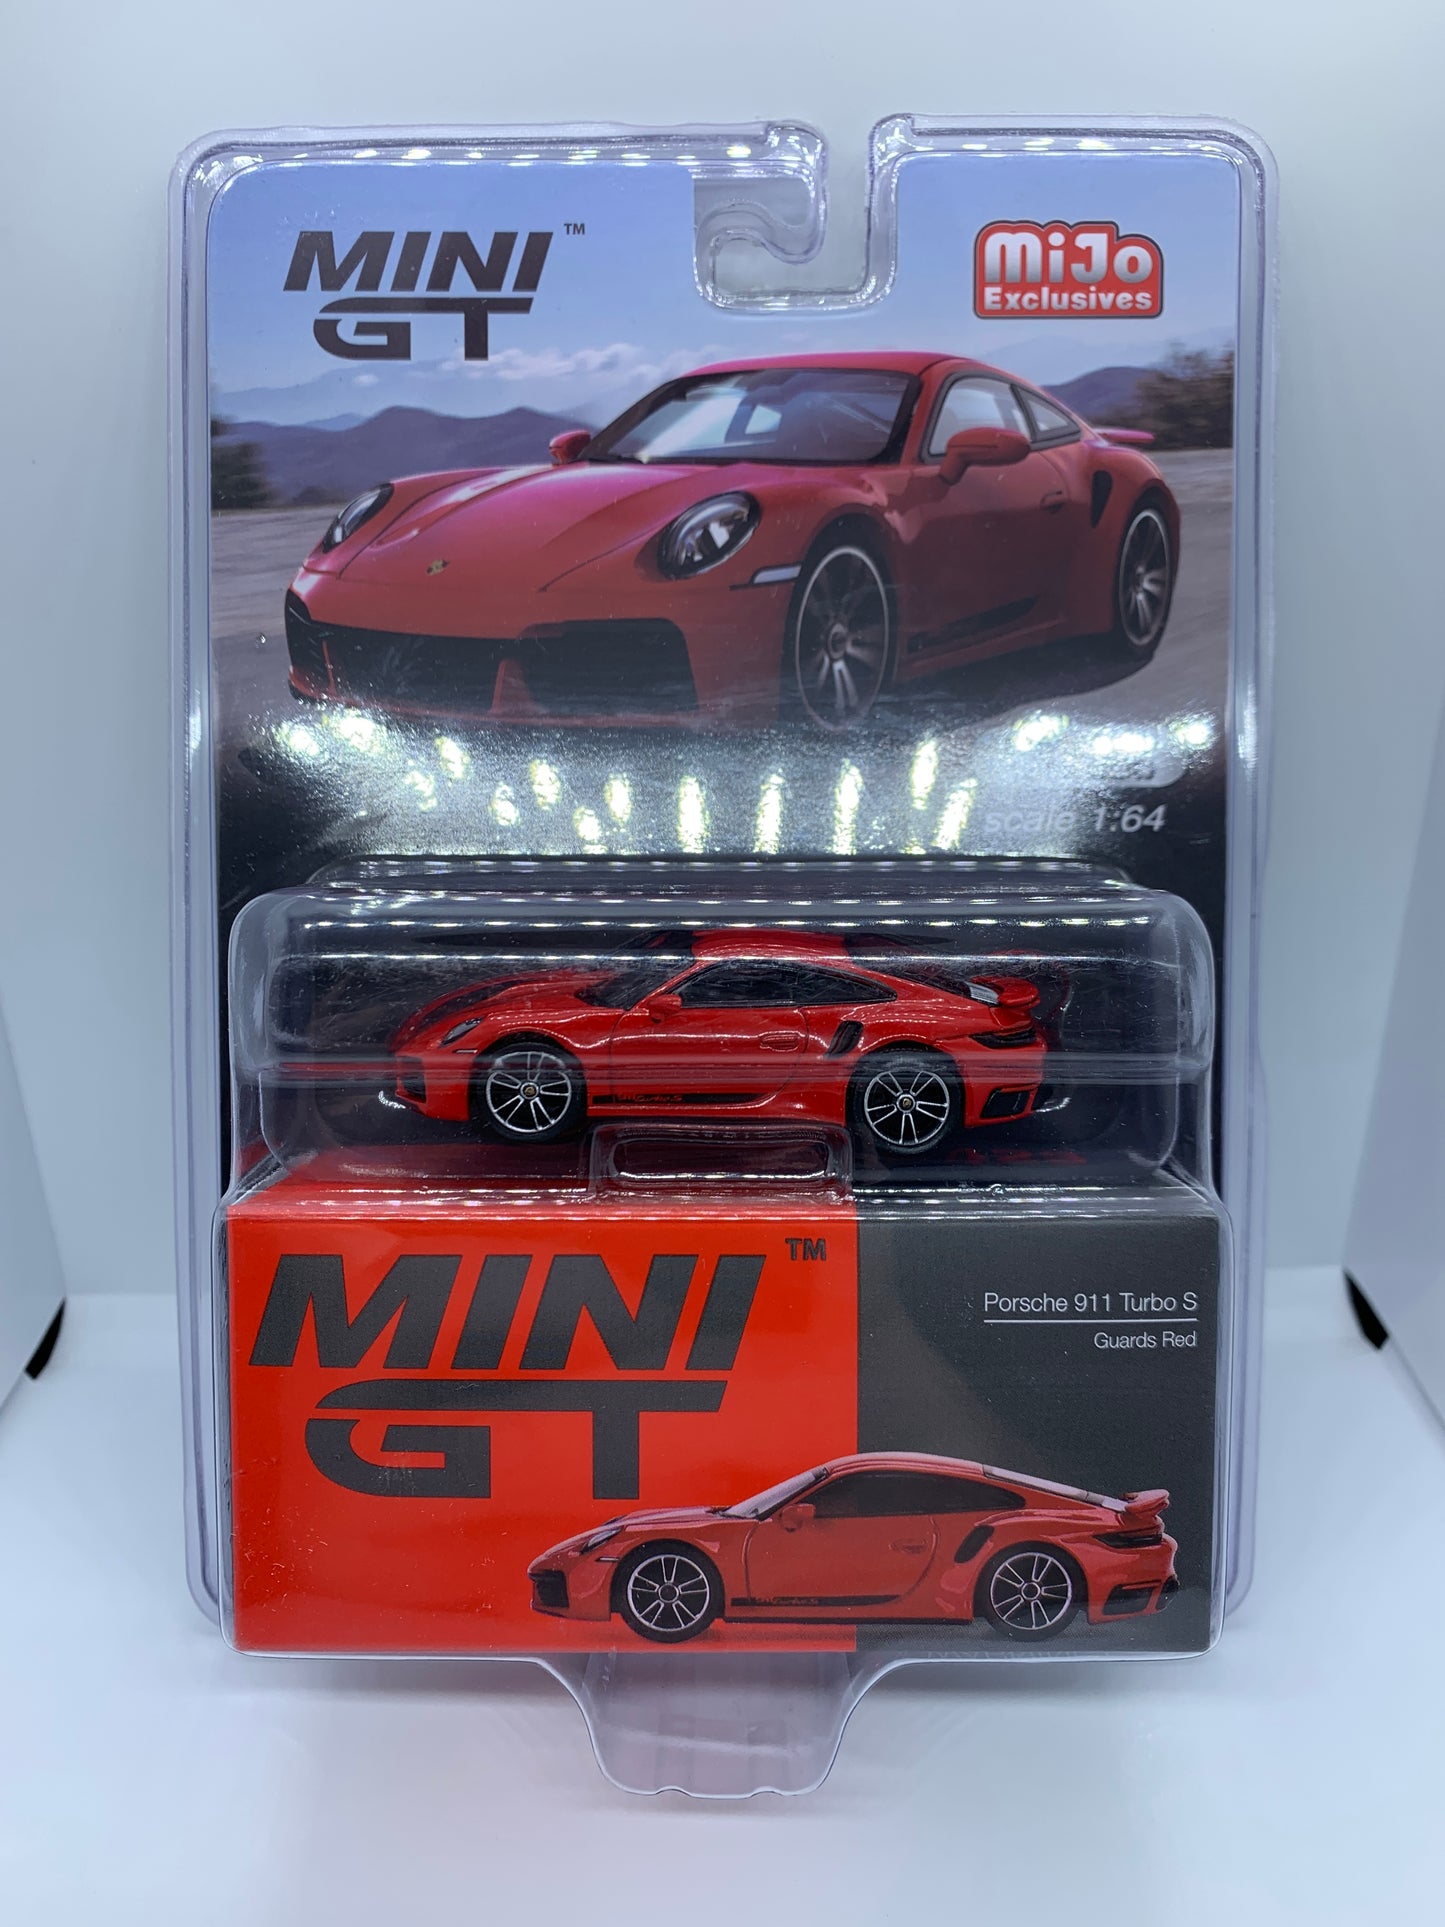 MINI GT - Porsche 911 Turbo S Guards Red 991 - Display Blister Packaging